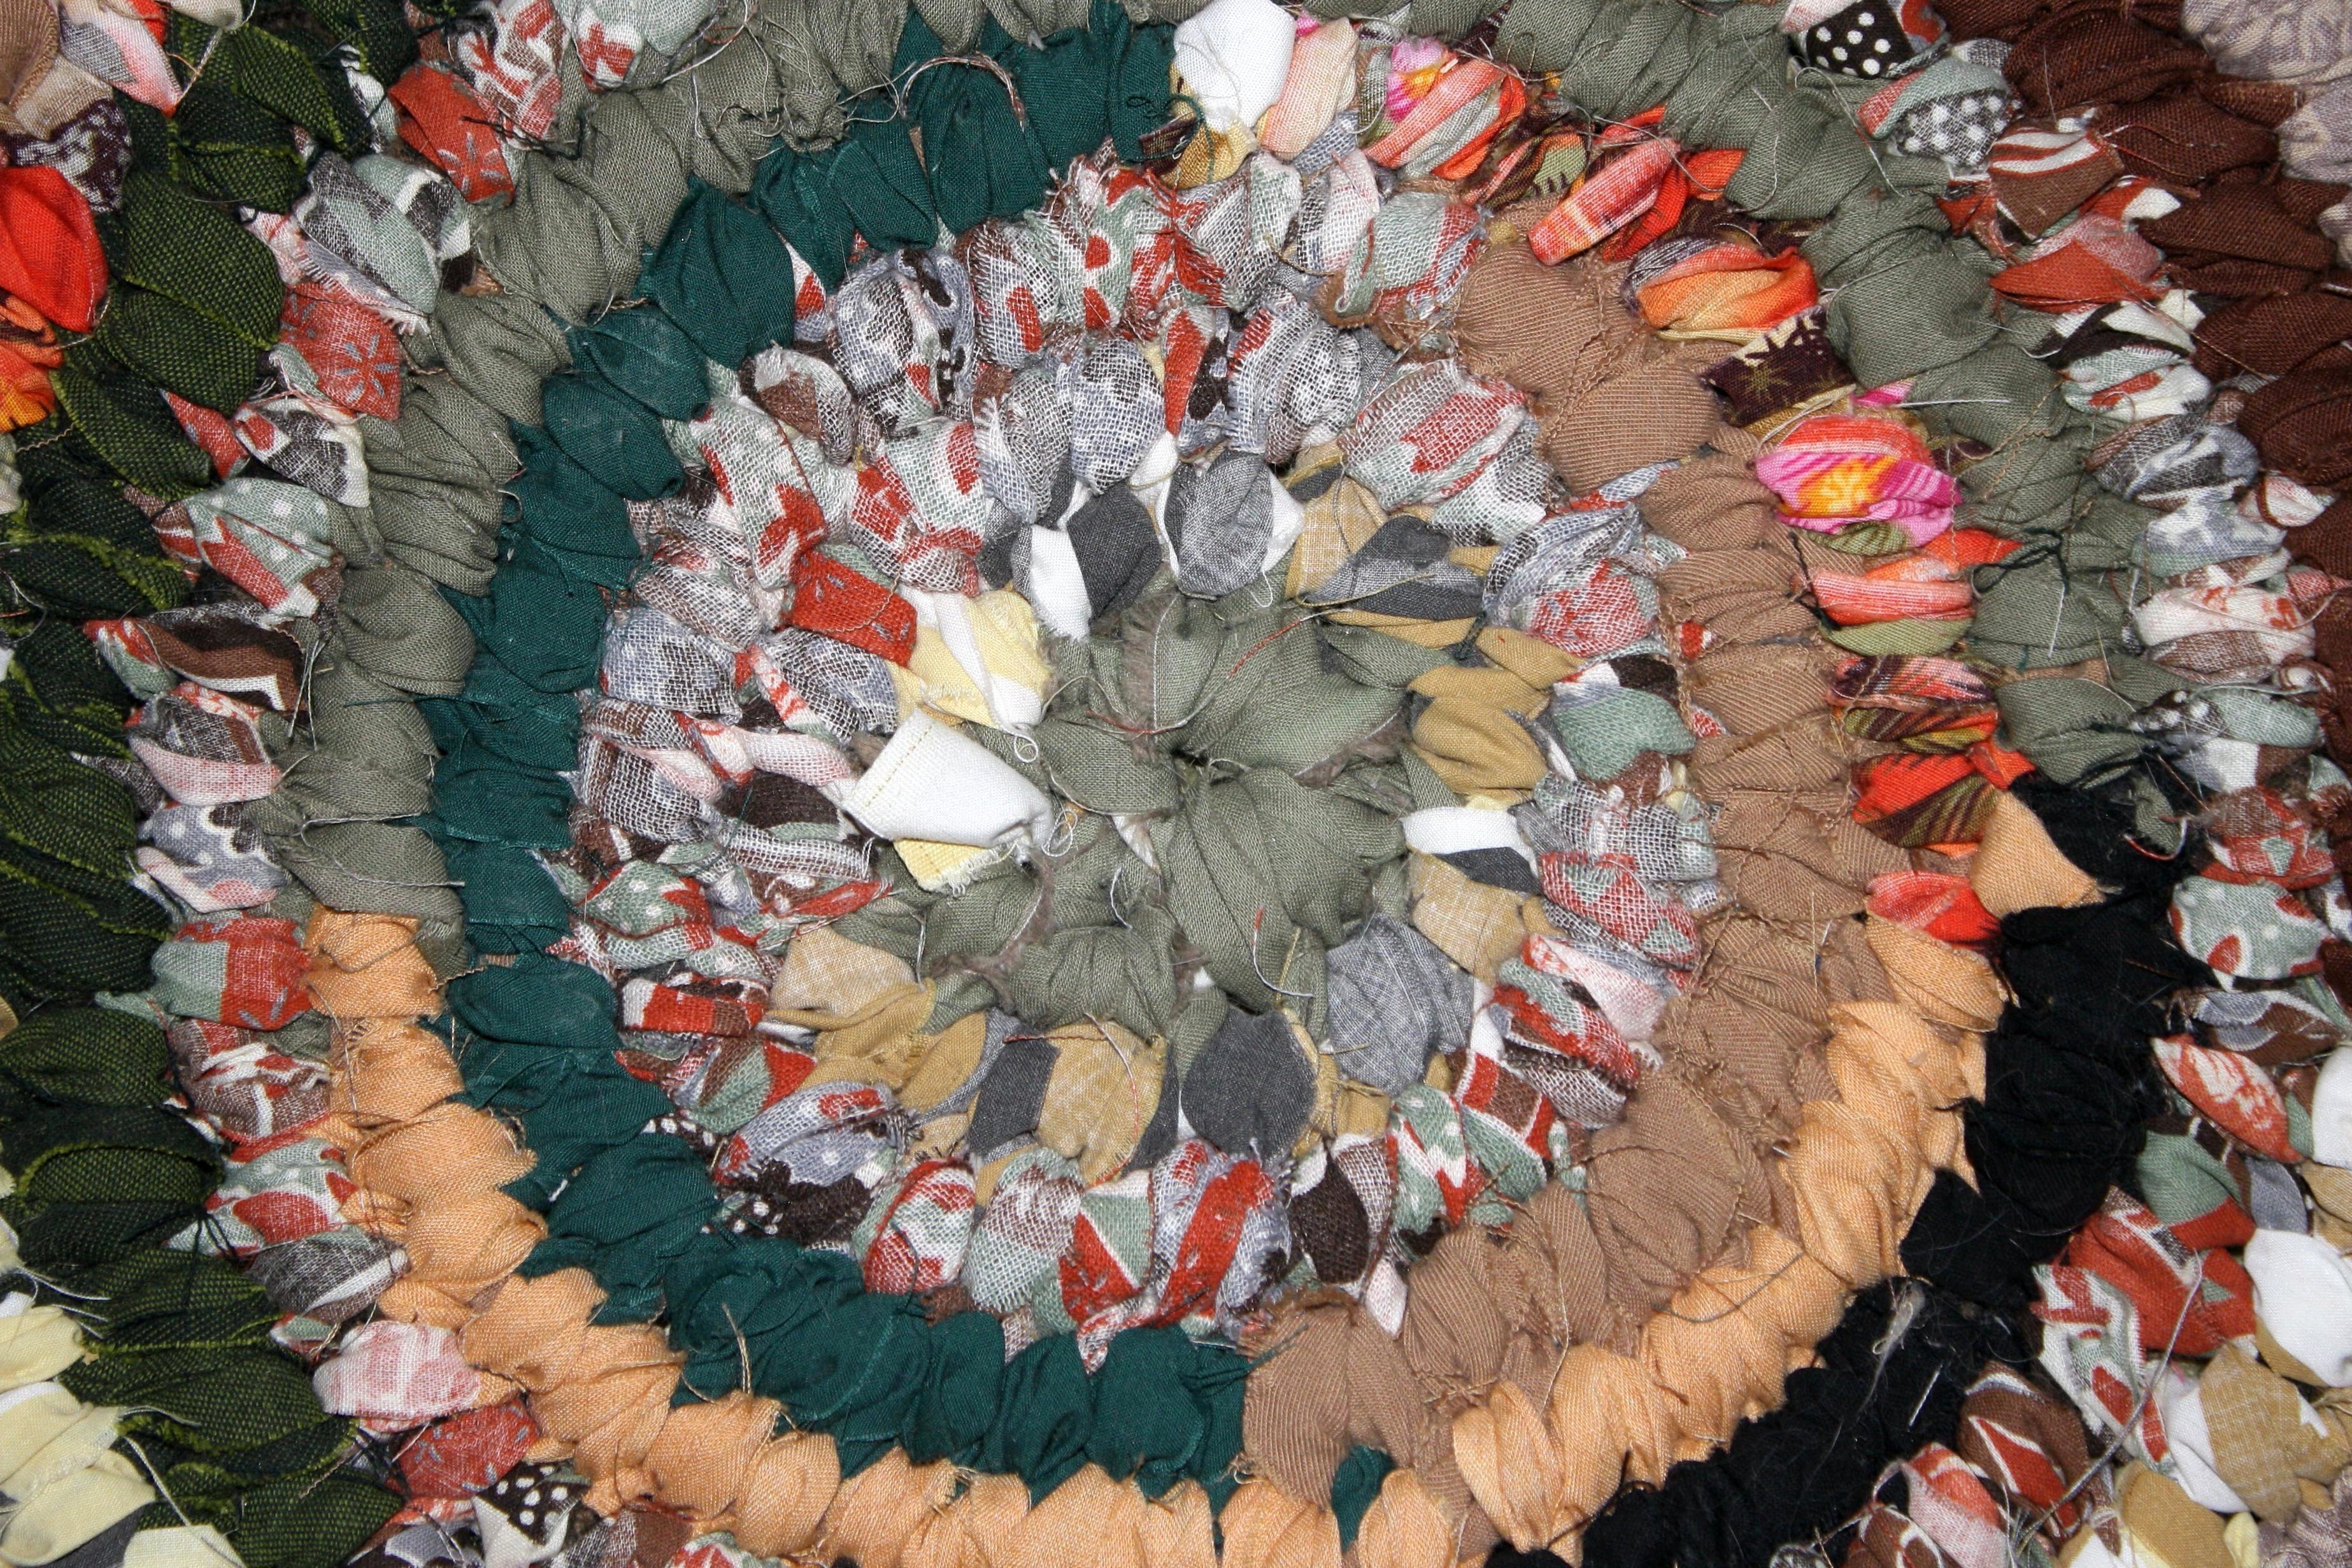 How to Make a Rag Rug - The Brooklyn Refinery - DIY Arts and Crafts